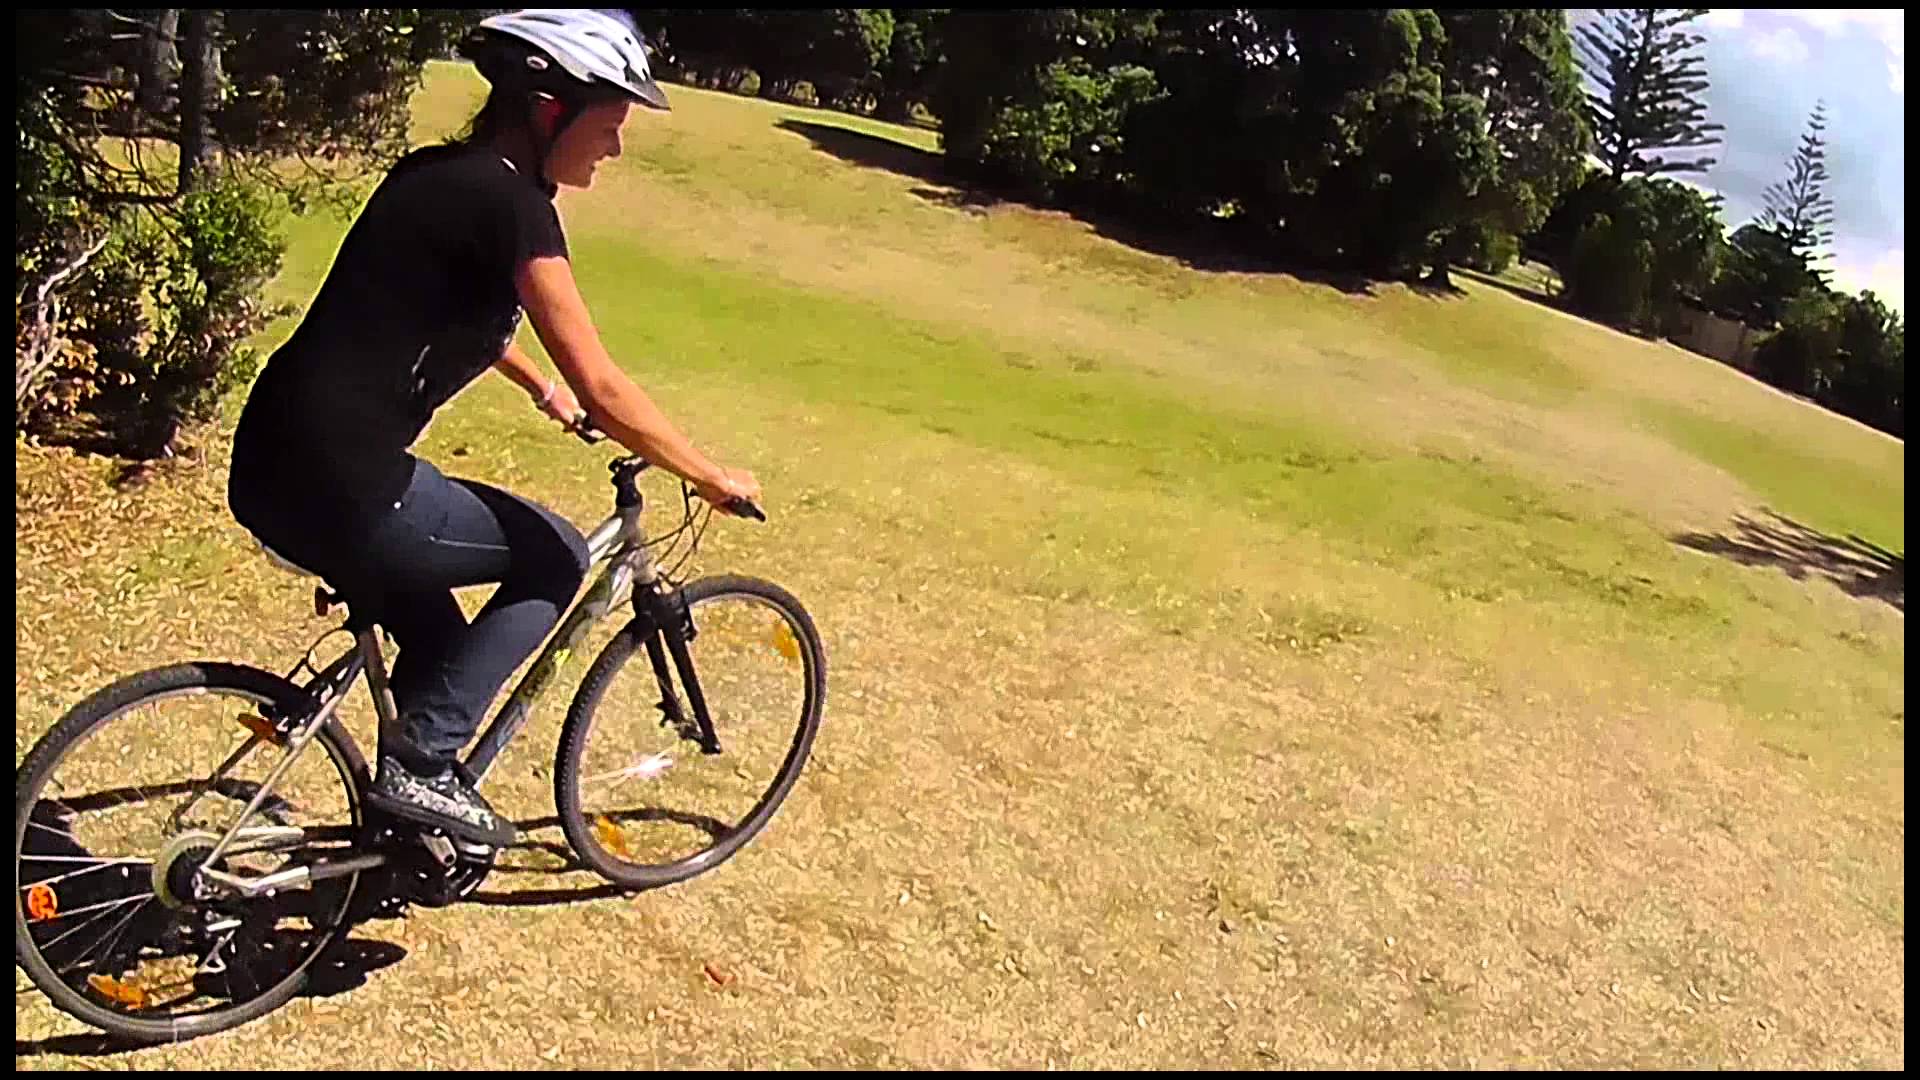 Panasonic Wearable Camera HX-A100 in Use [Bicycle]